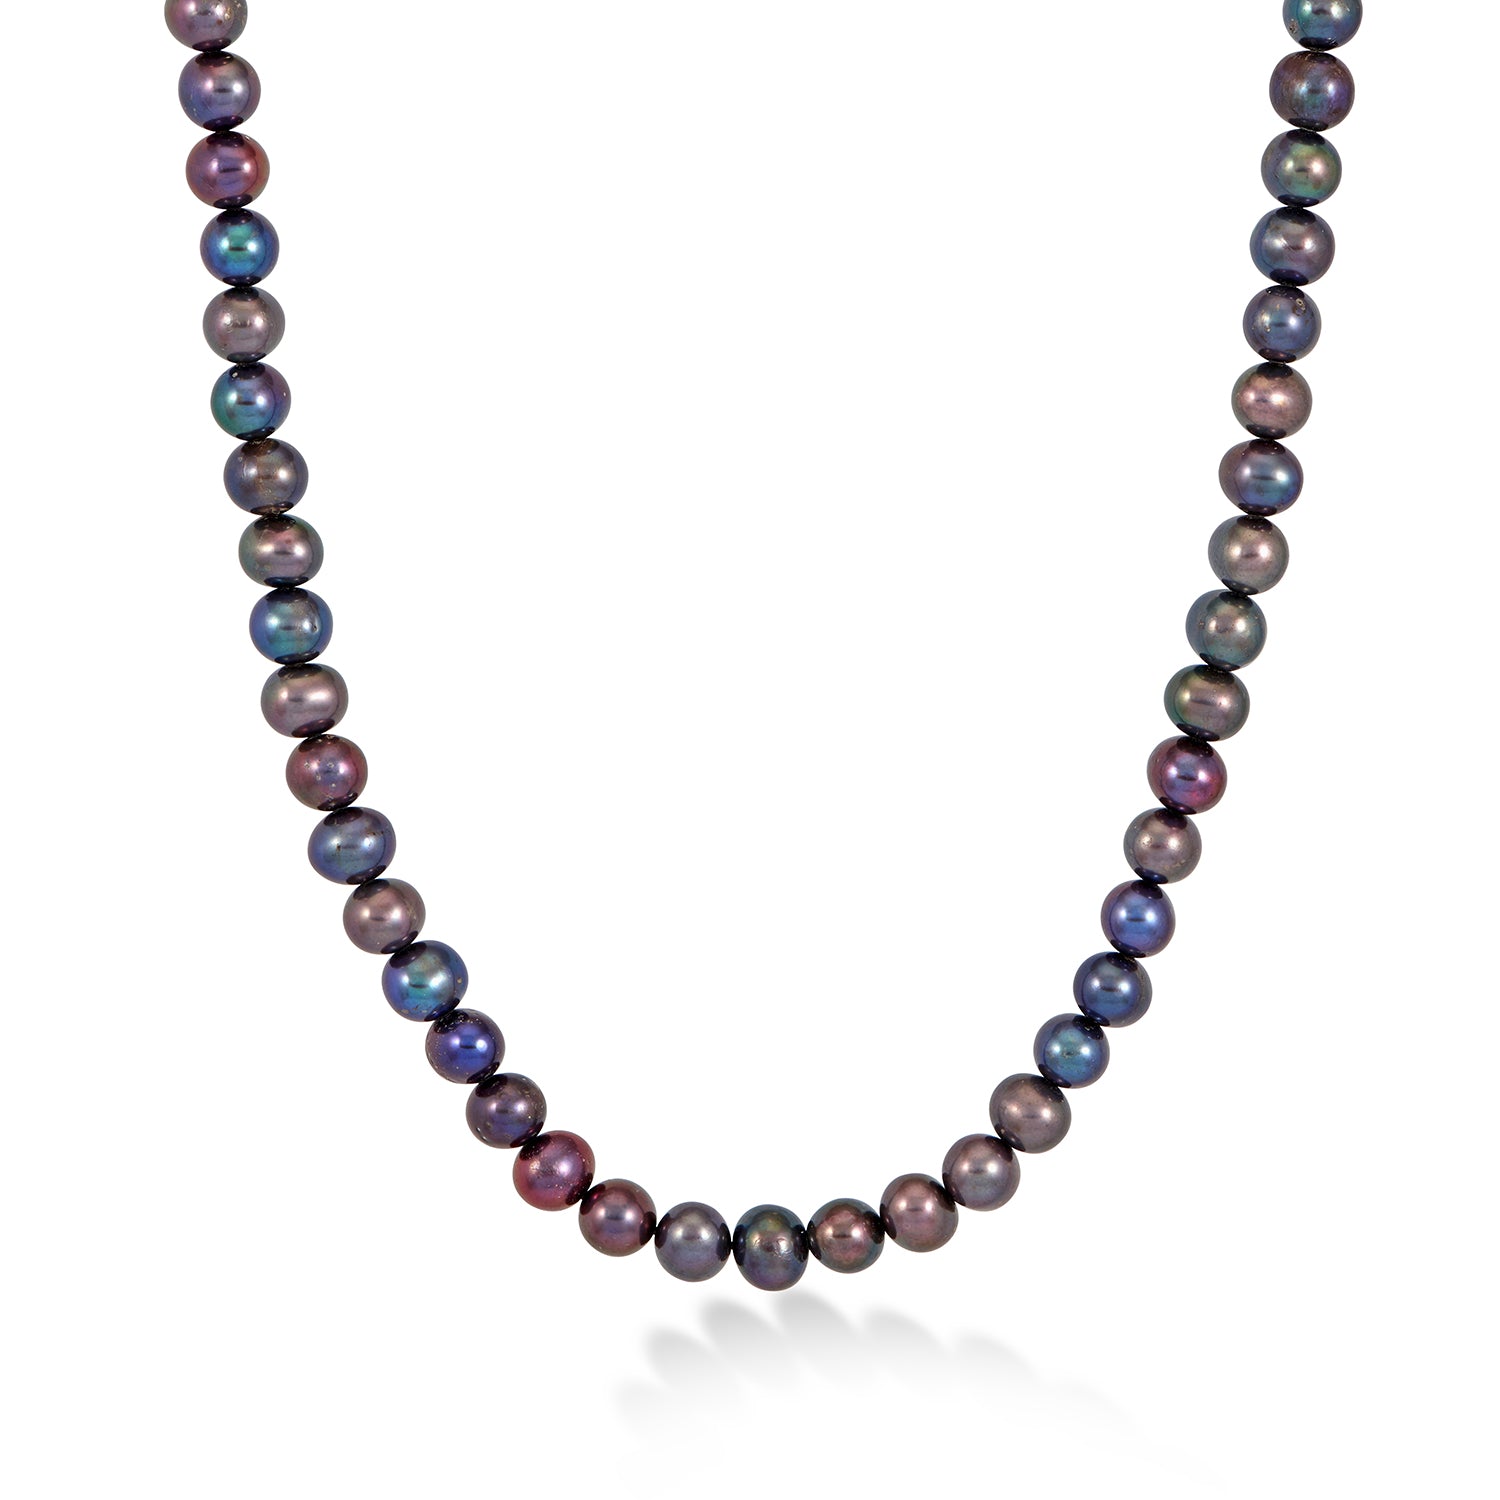 Timeless Peacock Freshwater Pearl Necklace